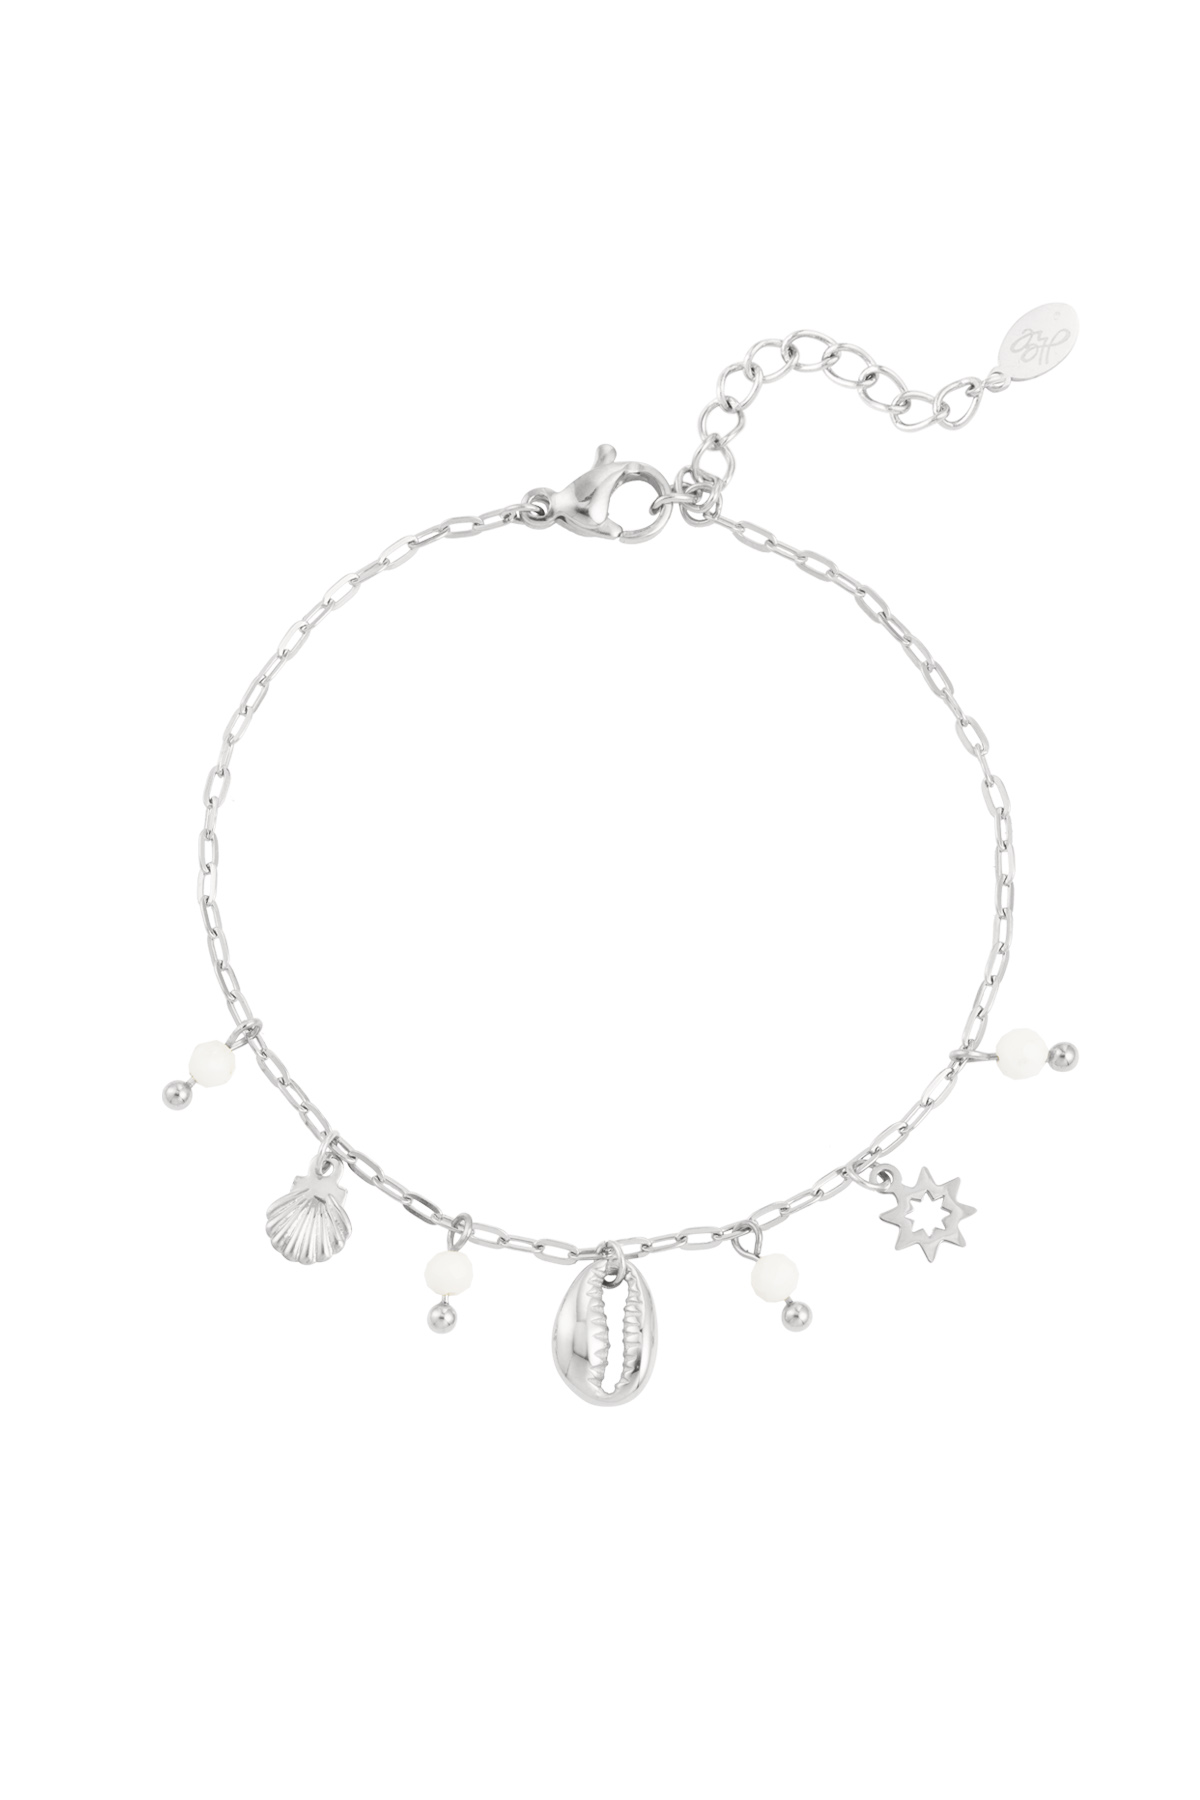 Bracelet charms and stones - silver 